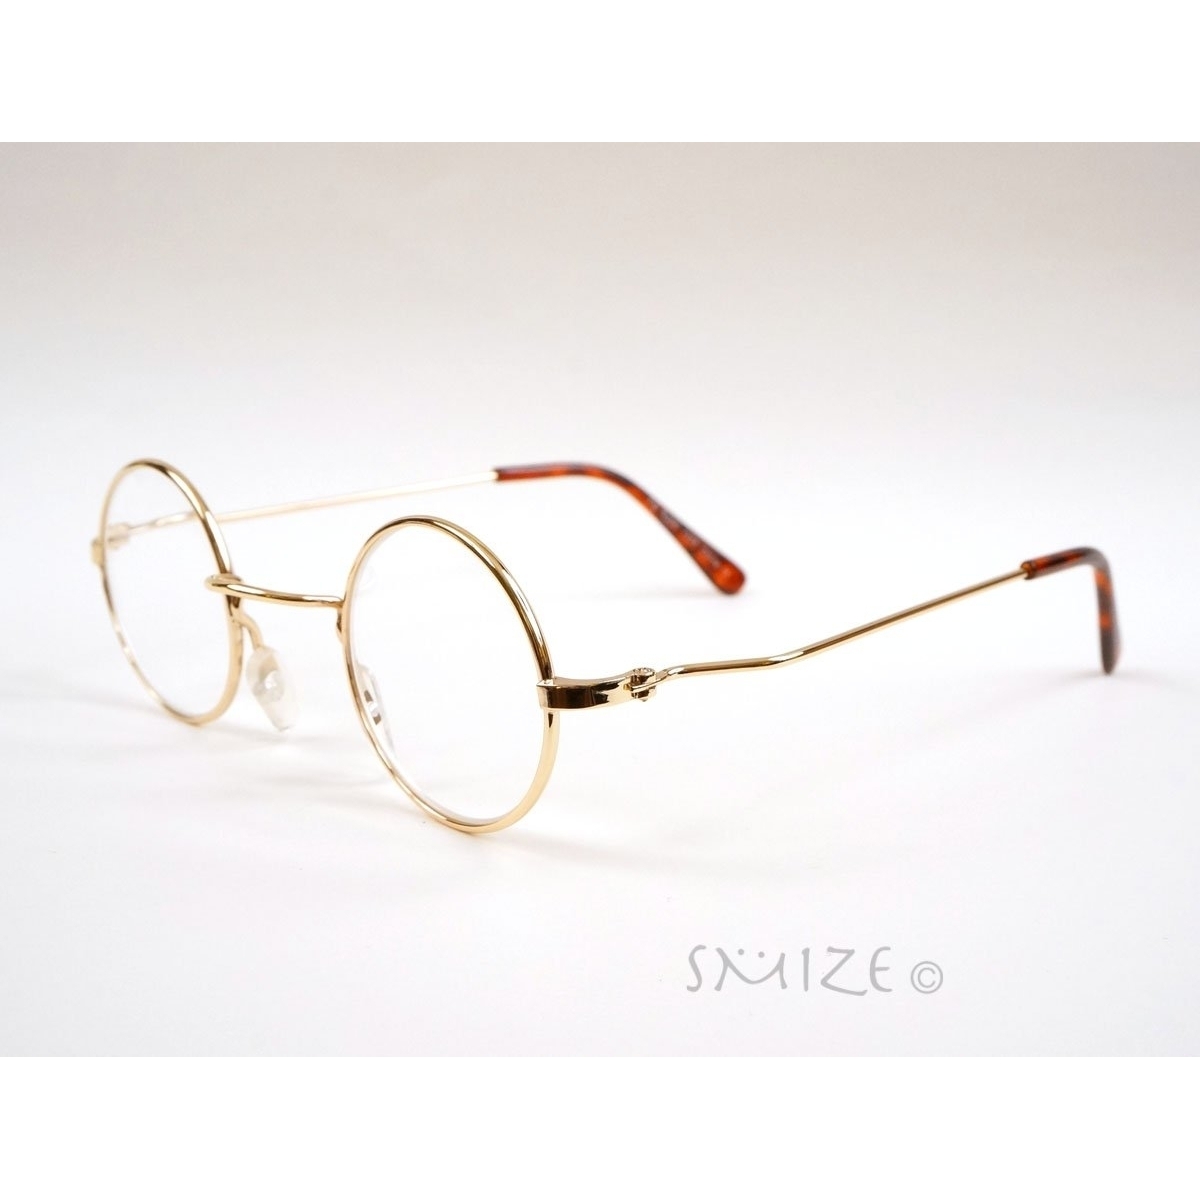 Lennon Style Round Metal Reading Glasses Black Gold Small Size Readers - Black, +1.00